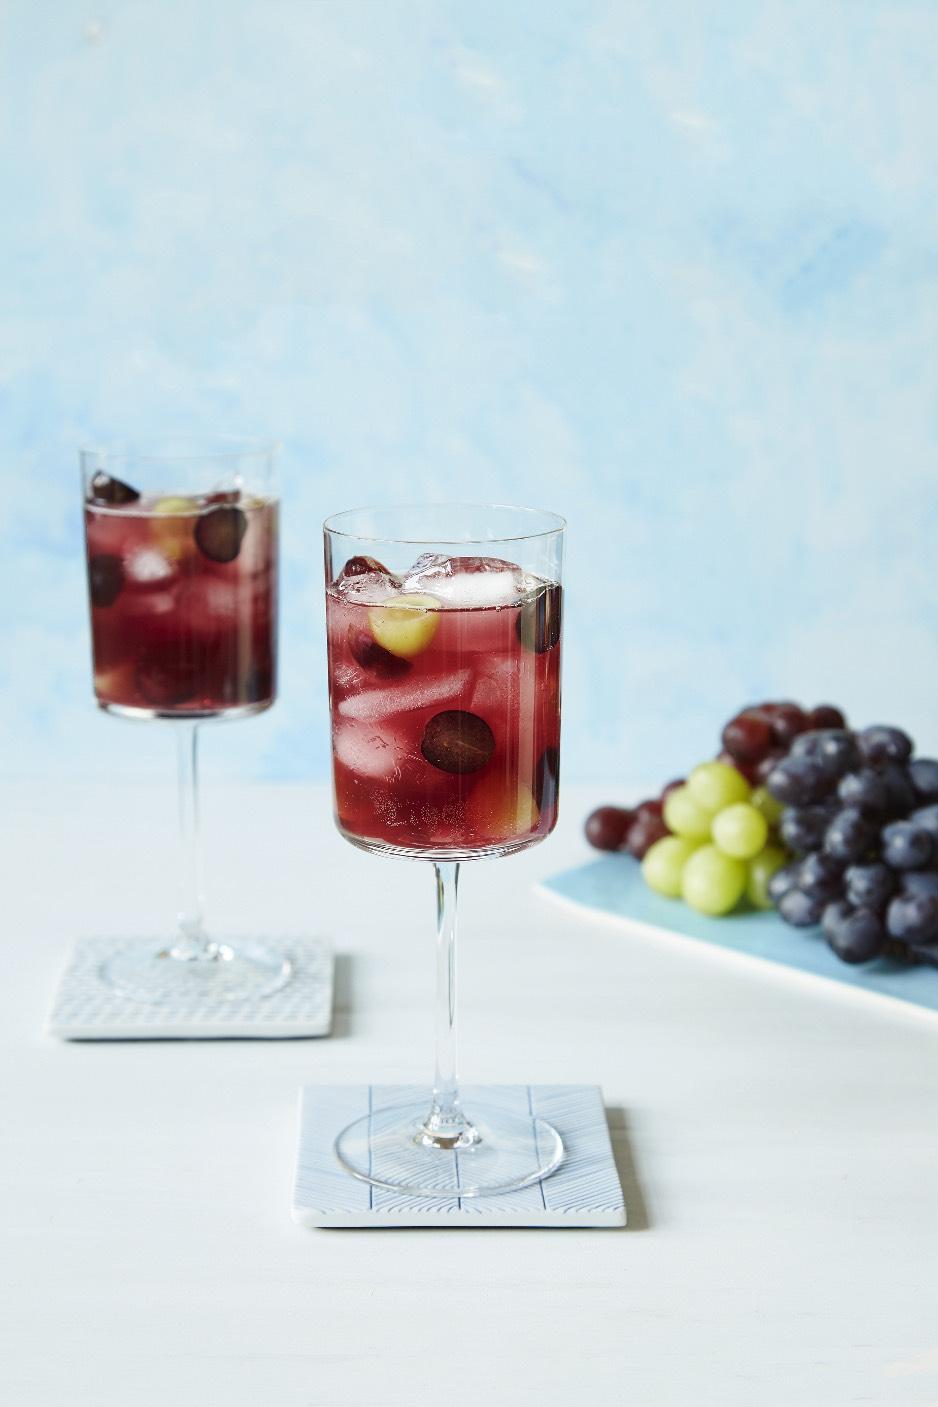 Concord Grape and Elderflower Spritzer An aromatic summer drink is a glorious sip for everyone.